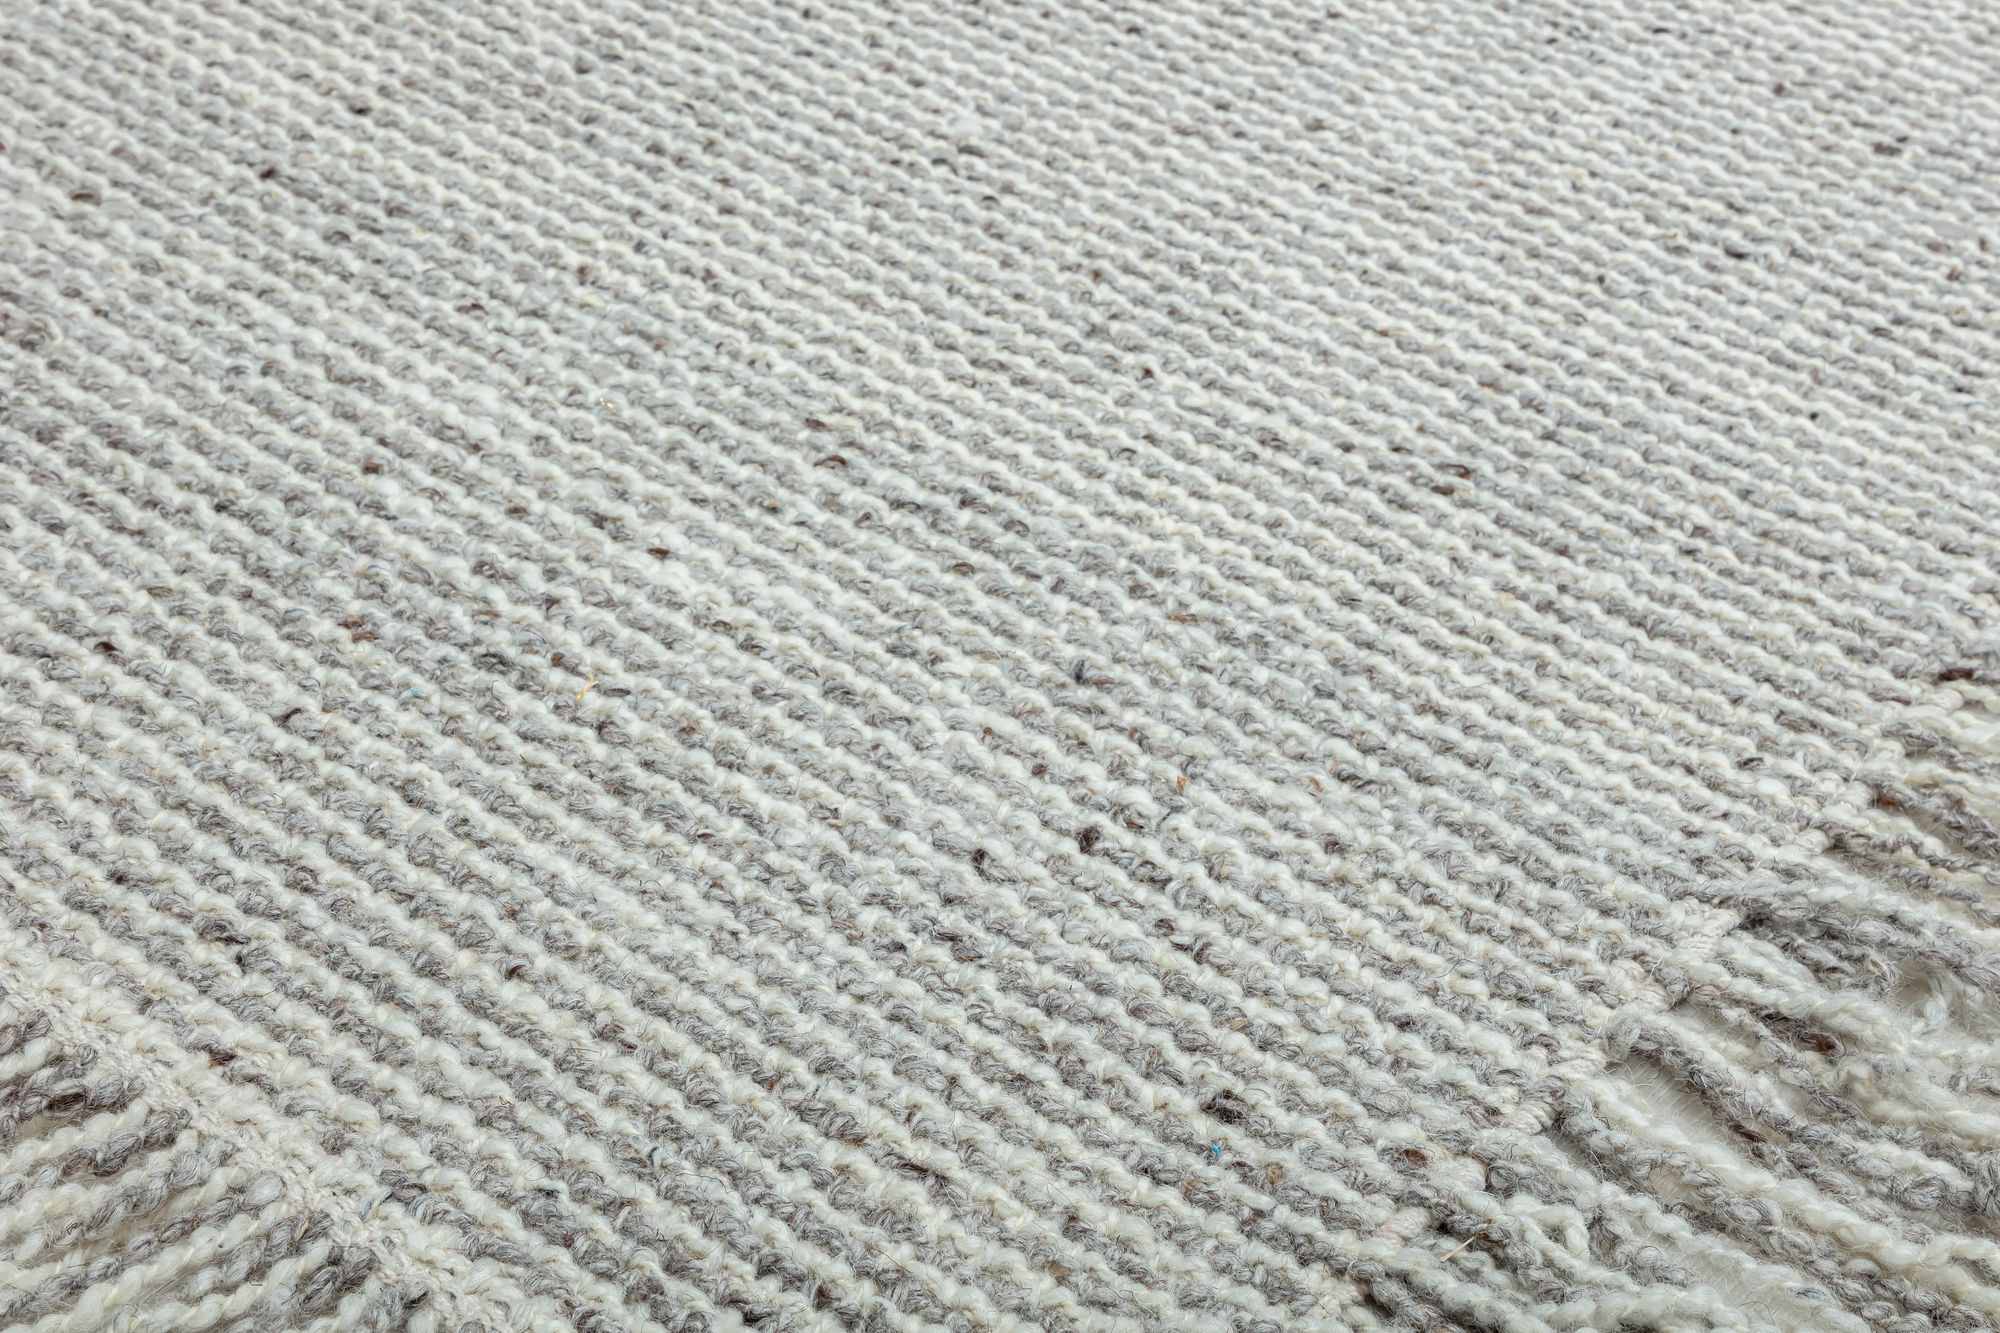 Close-up view of a textured beige and cream woven area rug, showcasing its intricate weave pattern and soft, natural fibers.